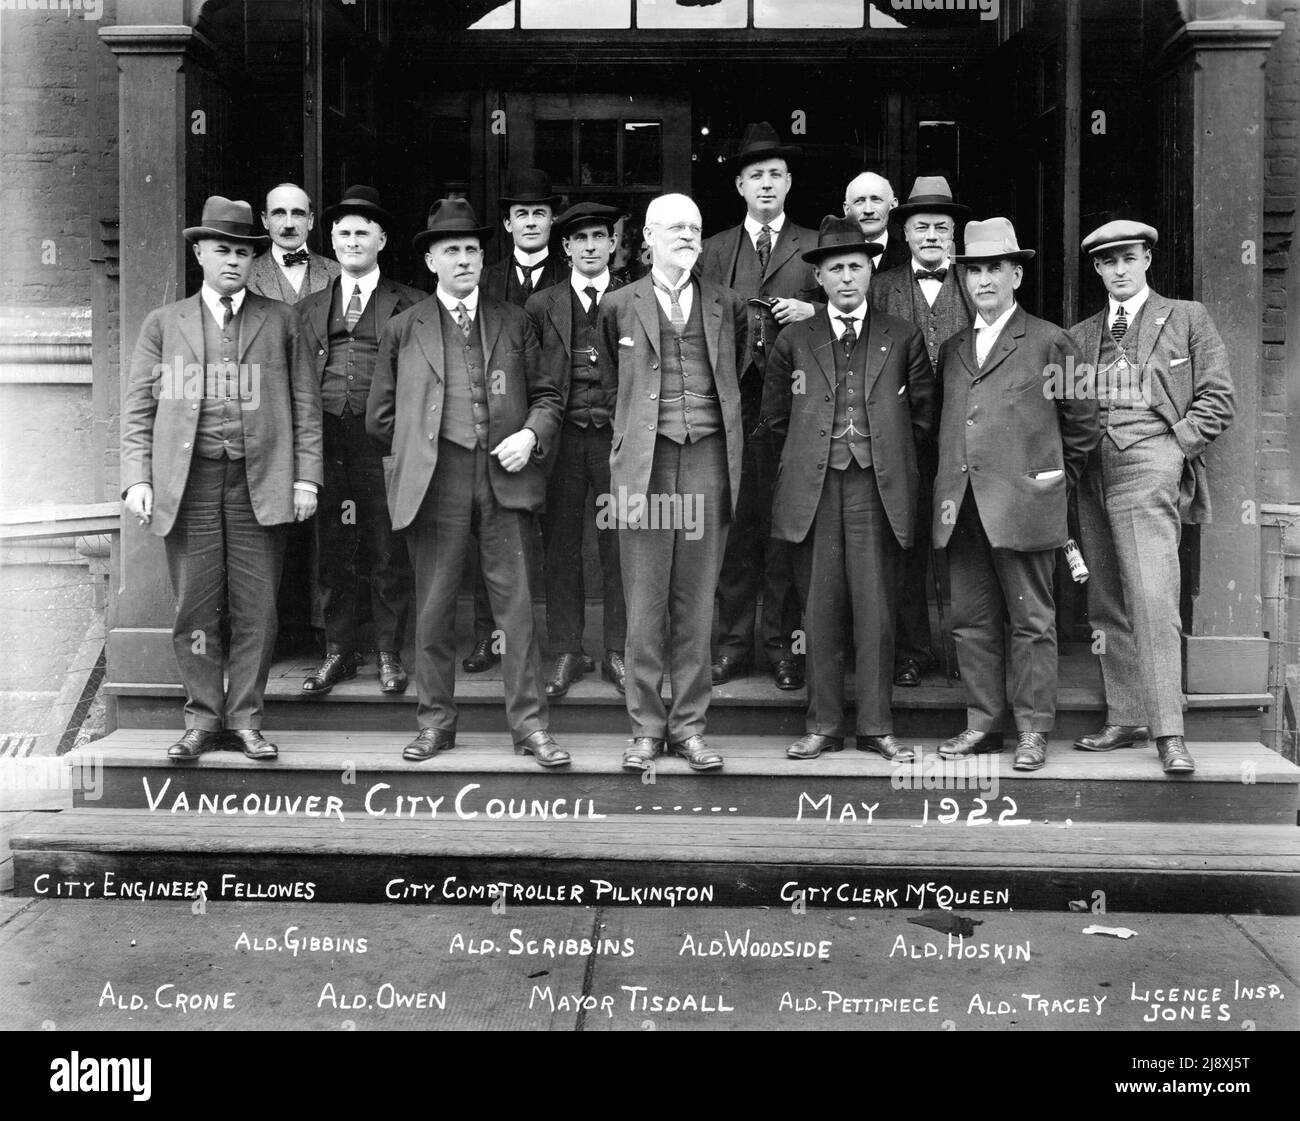 Vancouver City Council 1922. Group portrait. Men identified (left to right): Back row: City Engineer Fellows, City Comptroller Pilkington, City Clerk McQueen. Middle row: Ald. Gibbons, Ald. Scribbins, Ald. Woodside, Ald. Hoskin. Front row: Ald. Crone, Ald. Owen, Mayor Tisdall, Ald. Pettipiece, Ald. Tracey, Licence Insp. Jones Stock Photo